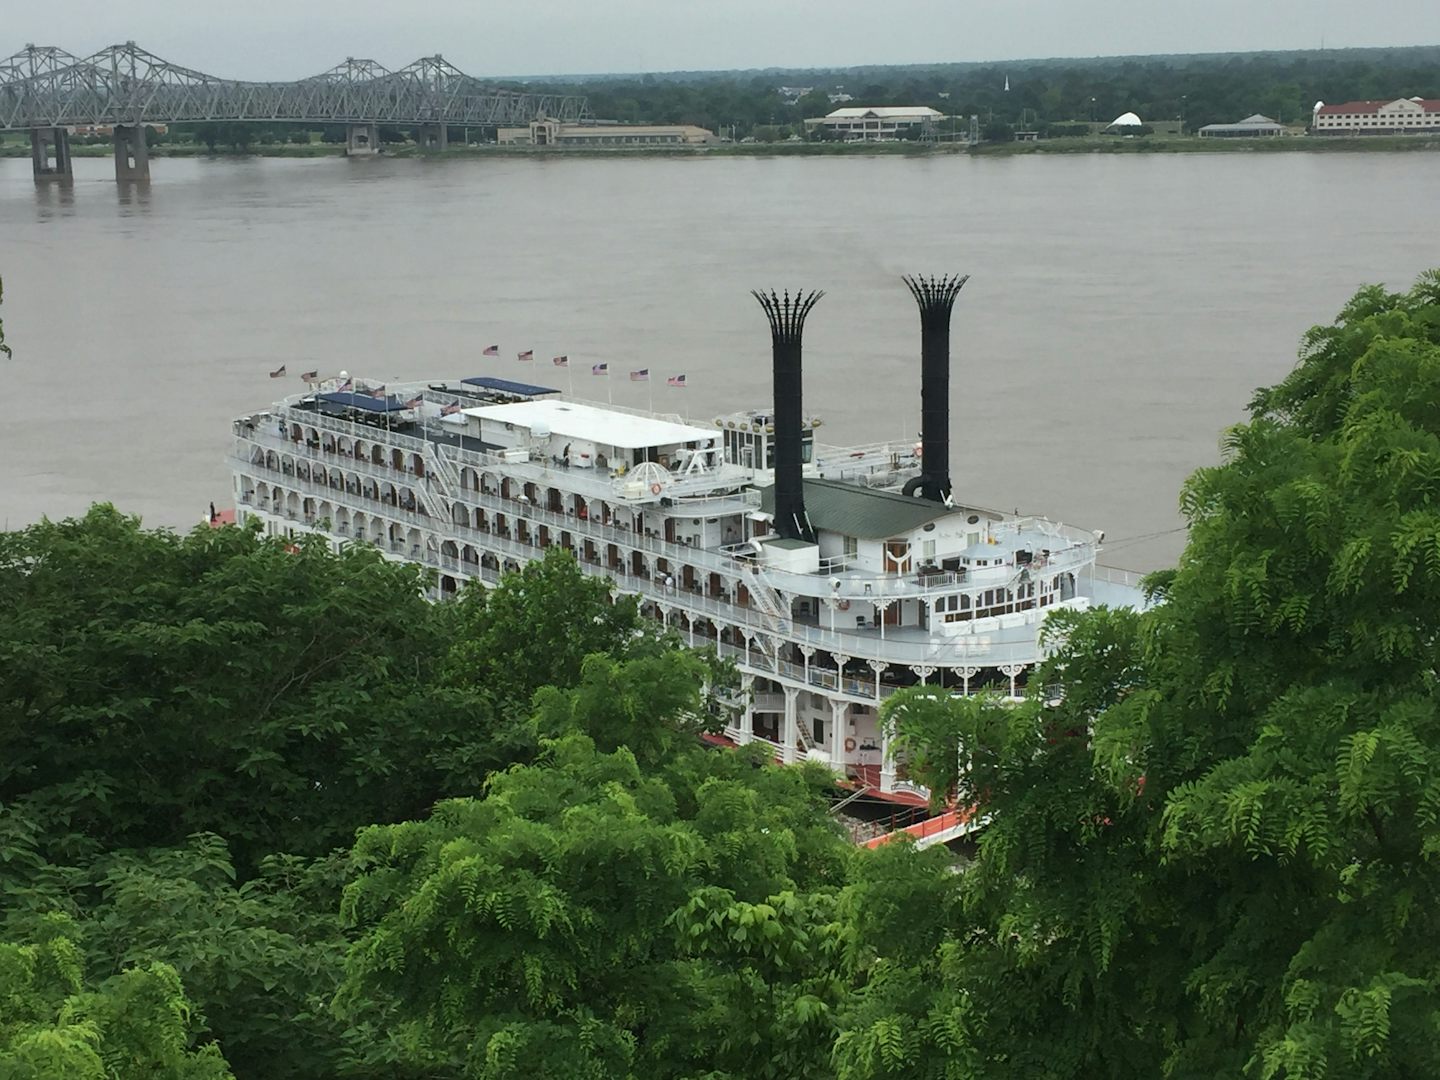 The American Queen from the bluffs above the River in Natchez